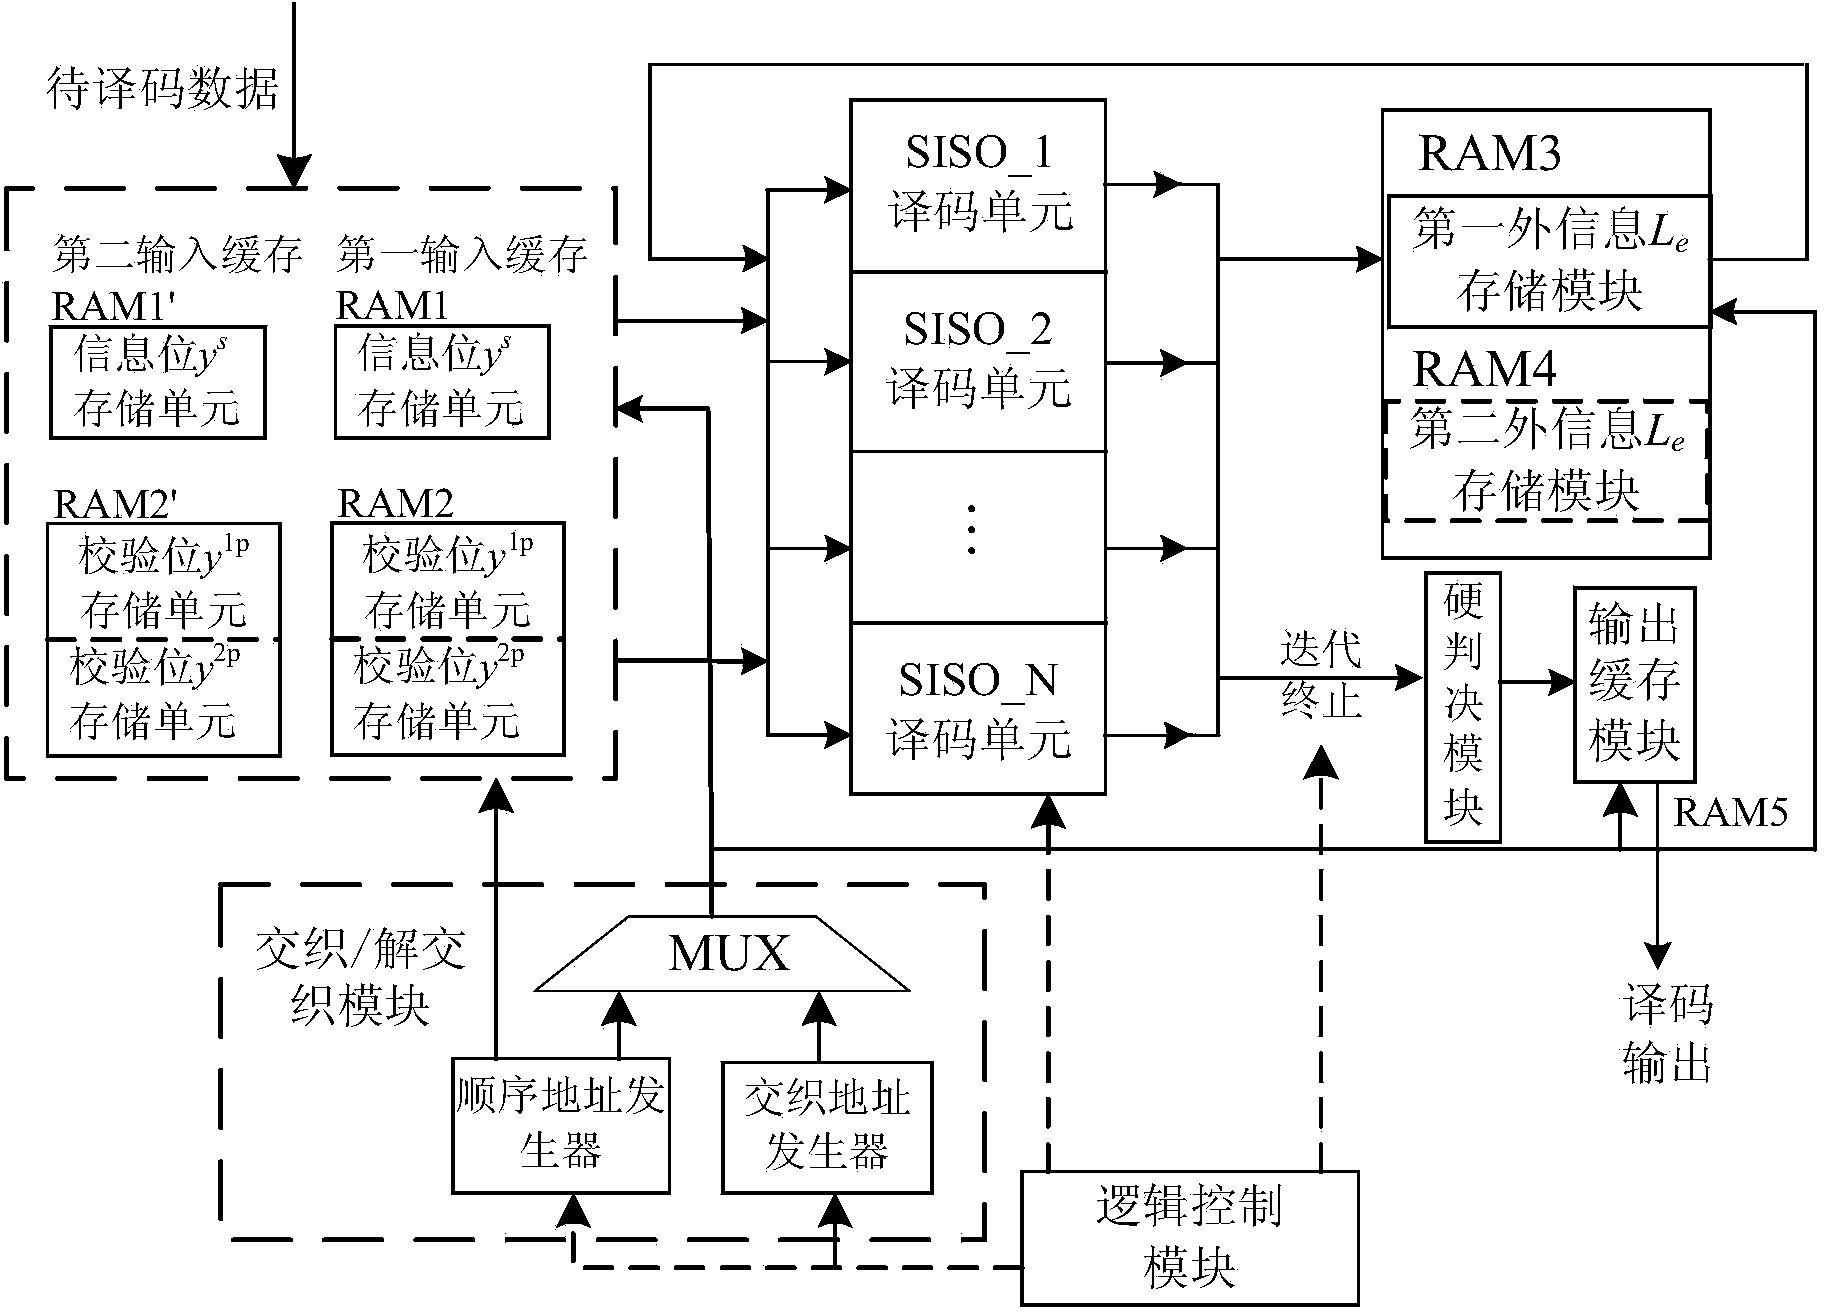 Turbo code high-speed decoding method based on parallel and windowing structure